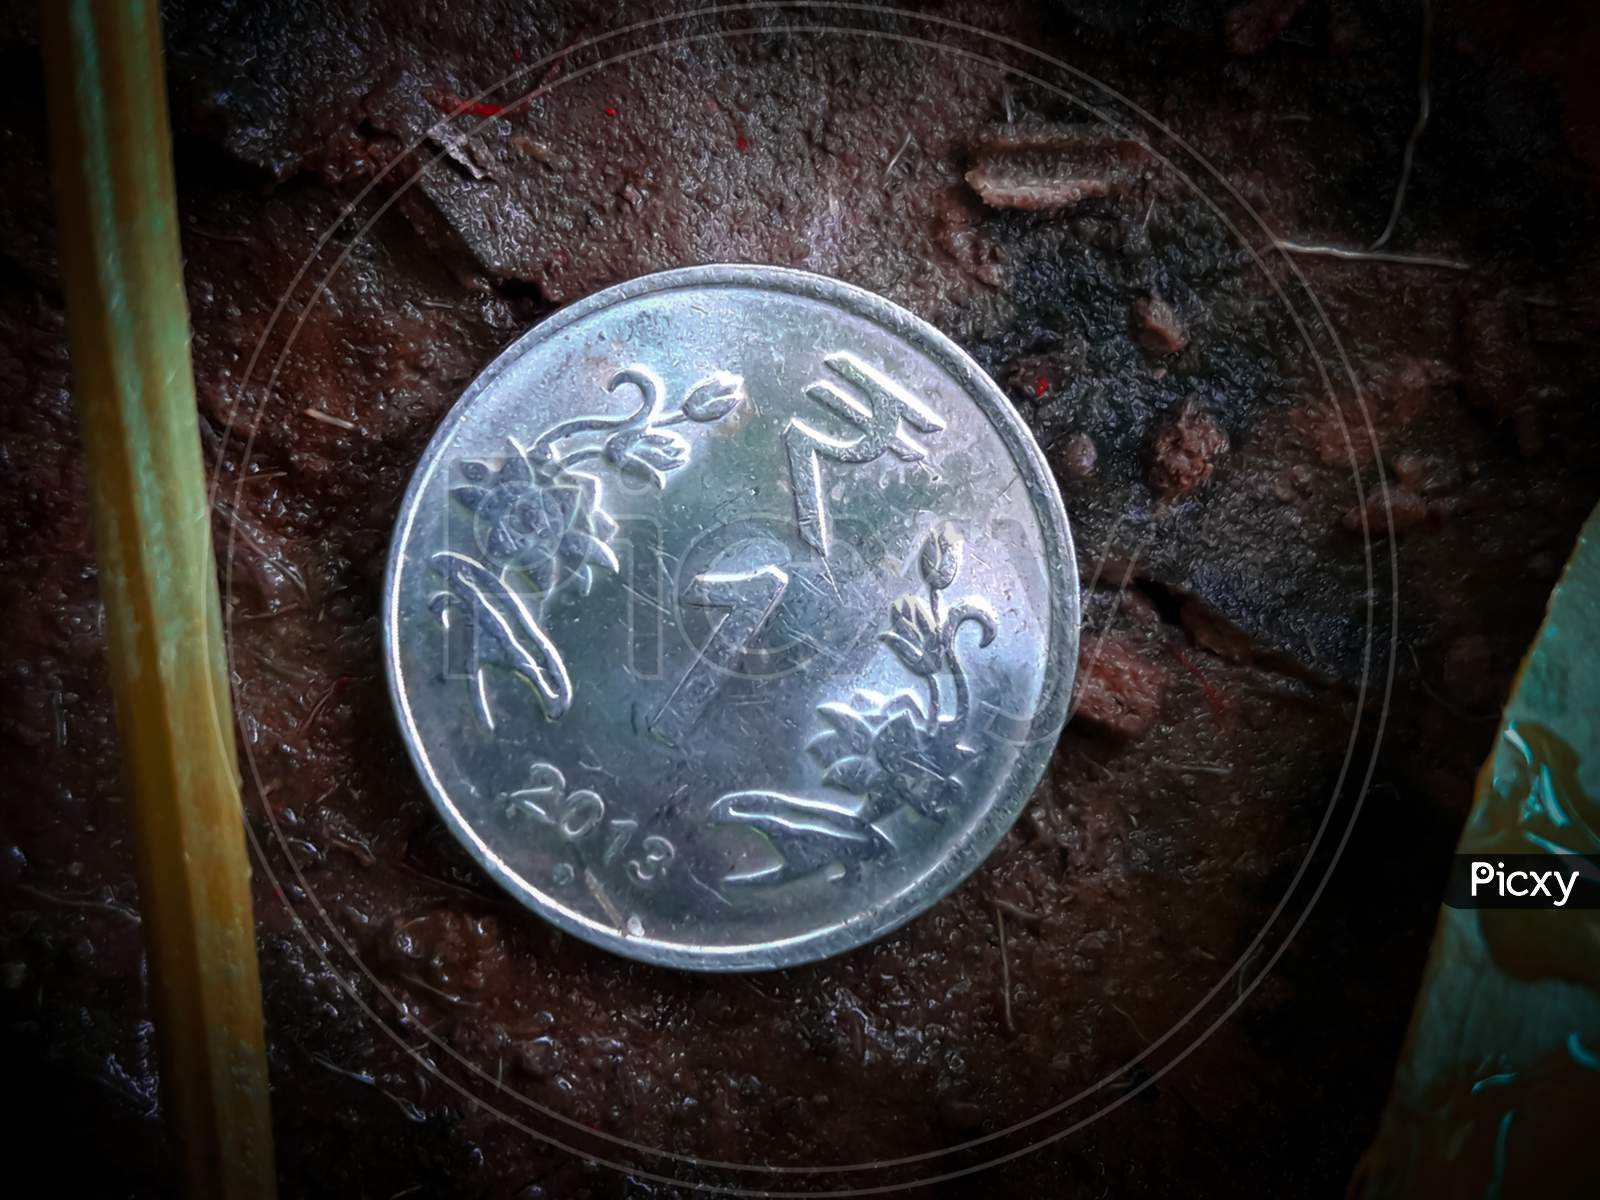 1 Rupee Coin In The Soil With Dust Around It